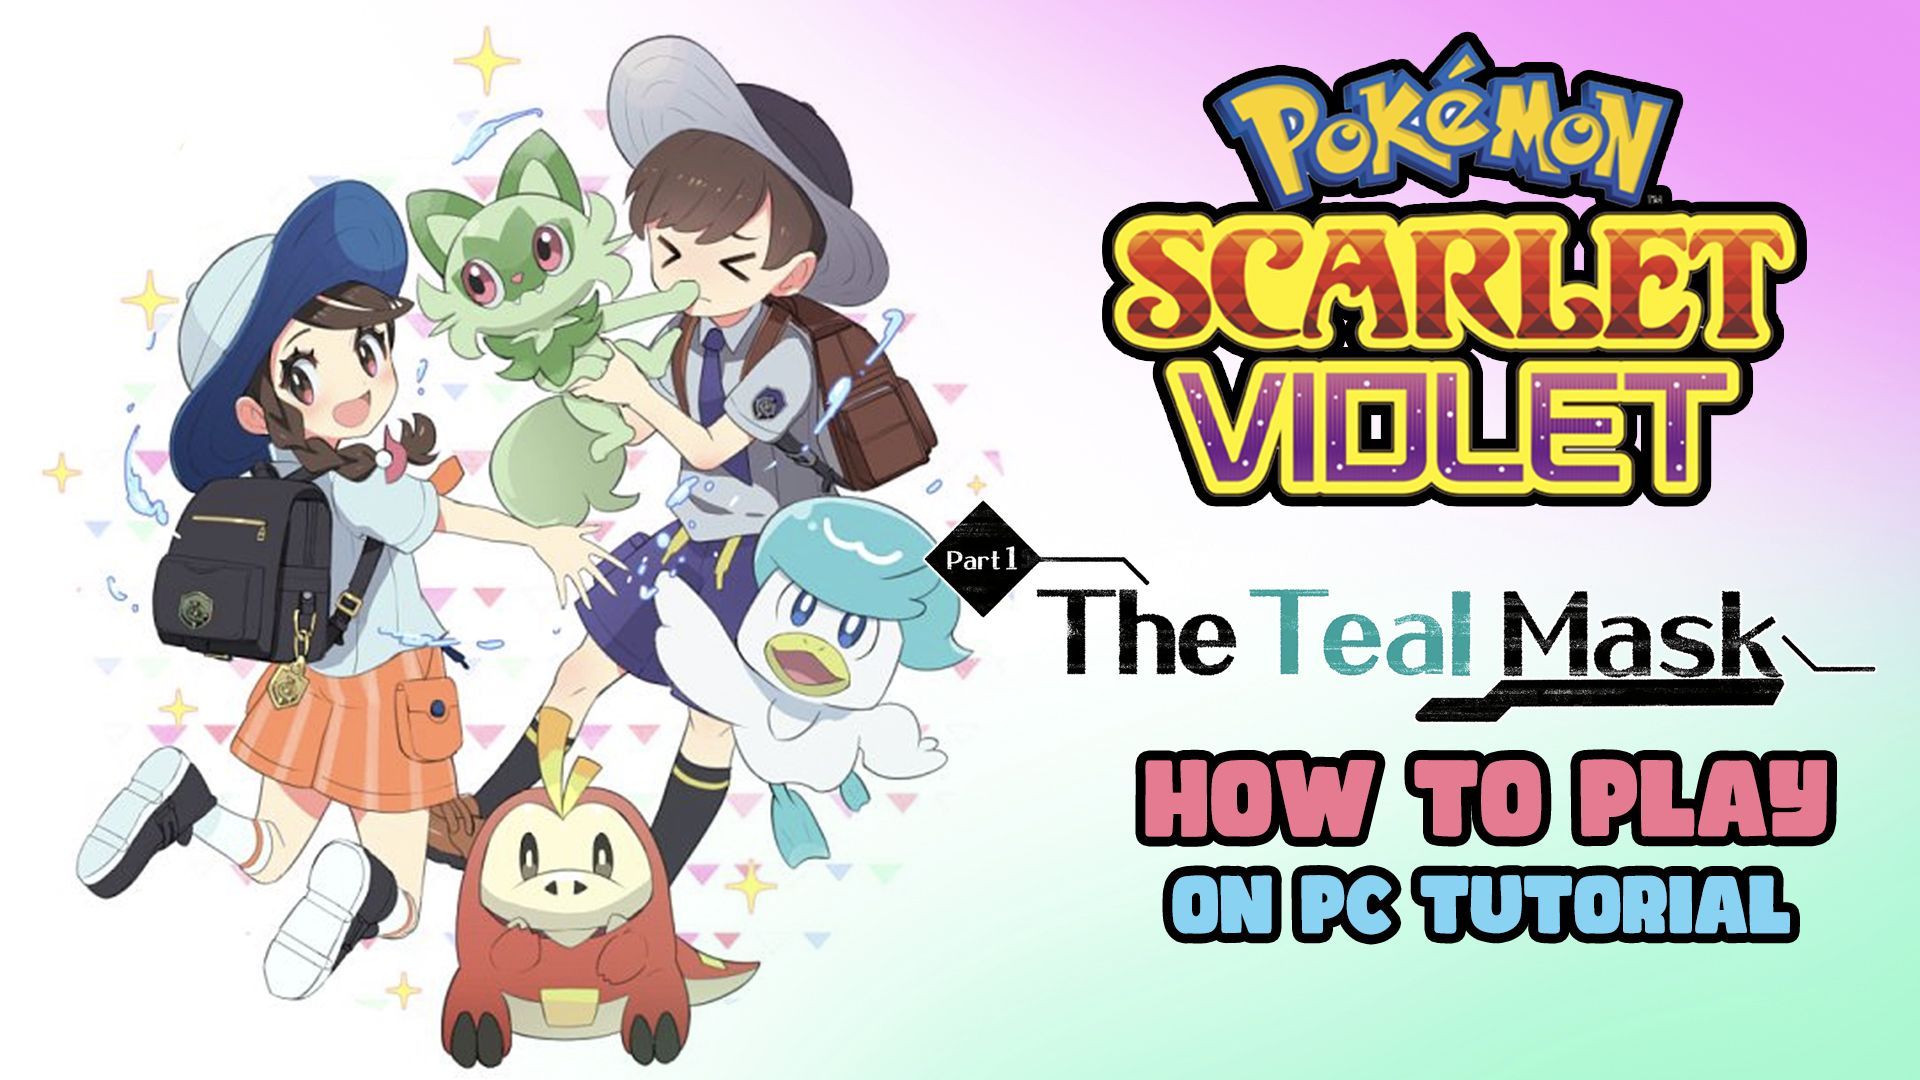 Pokemon Scarlet & Violet: How to play on PC?